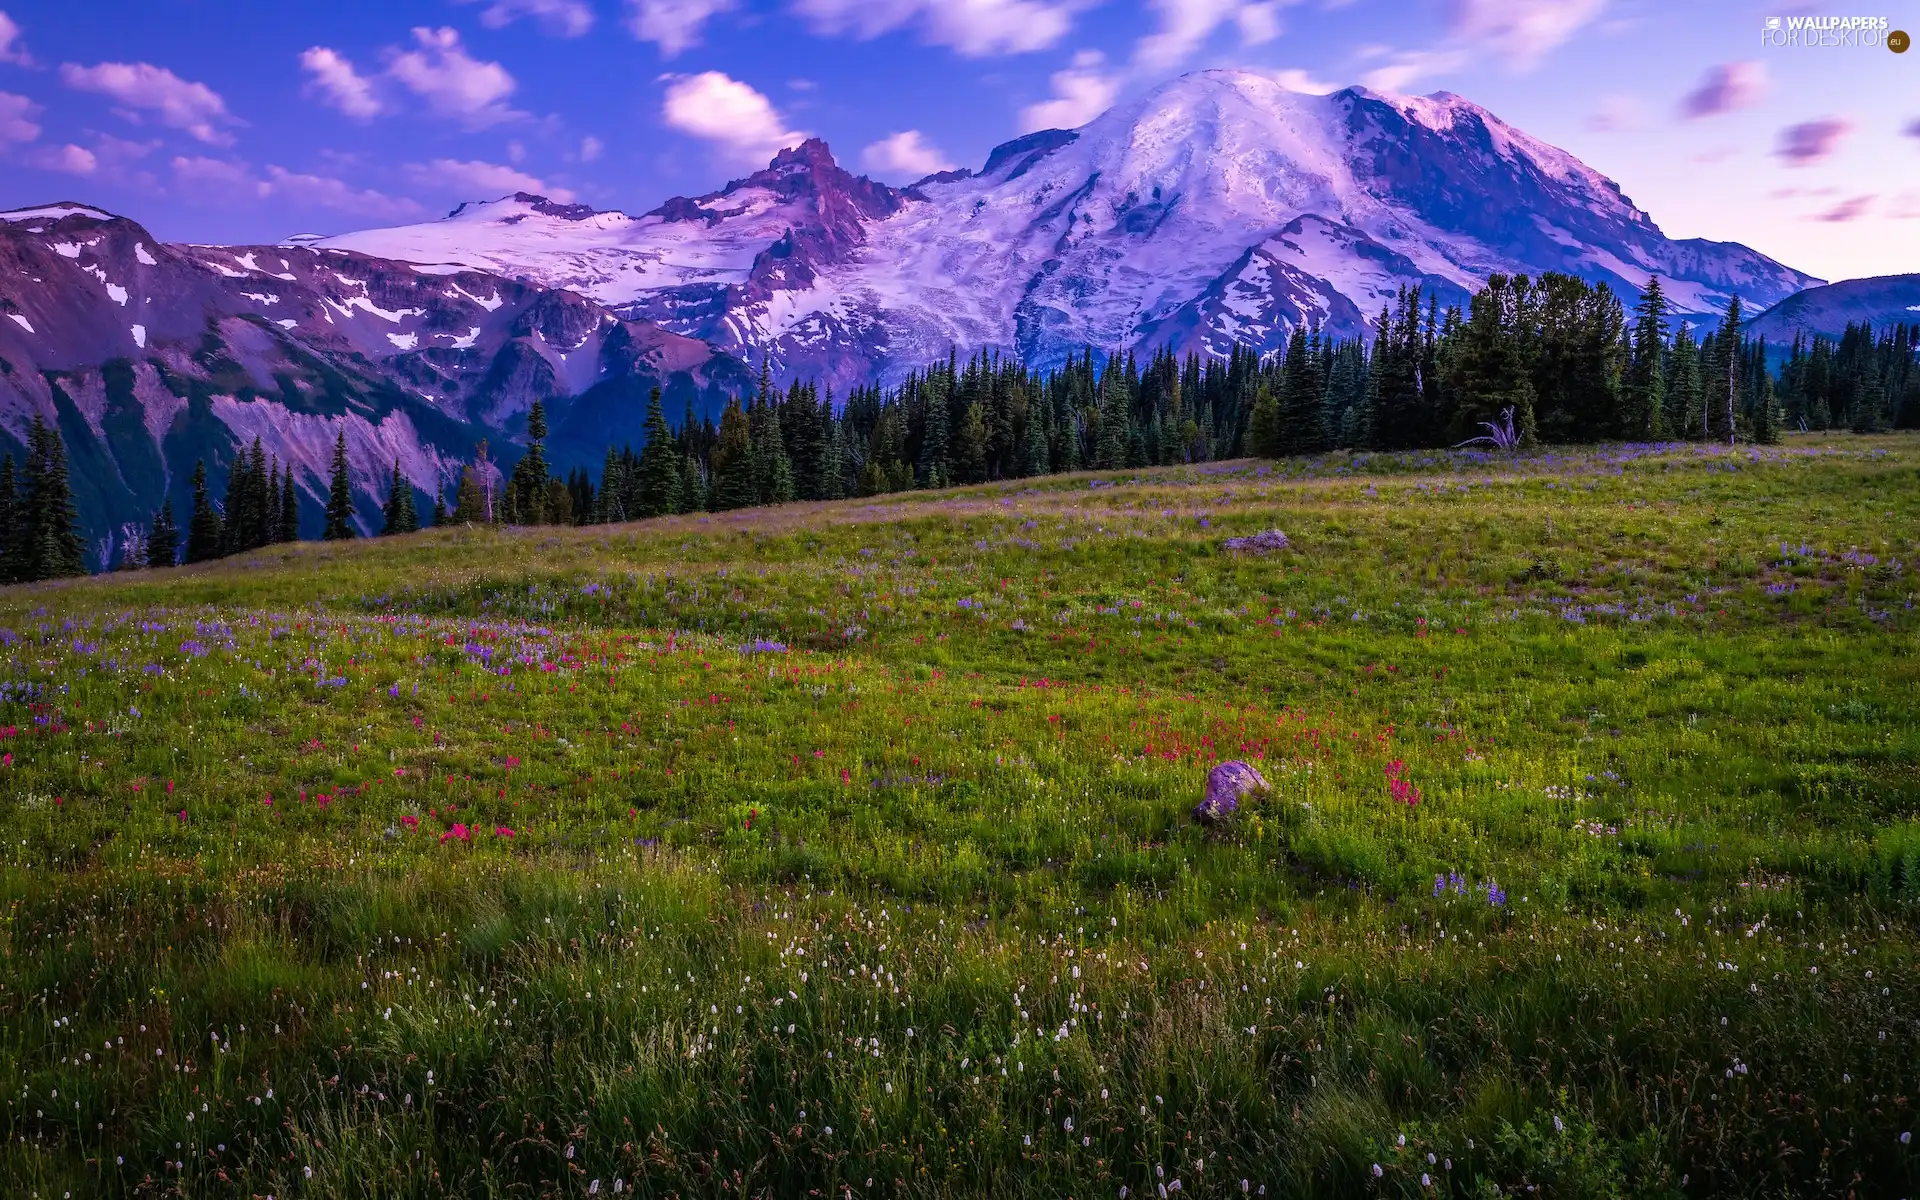 Mount Rainier National Park, Mountains, clouds, Meadow, Wildflowers, Washington State, The United States, Flowers